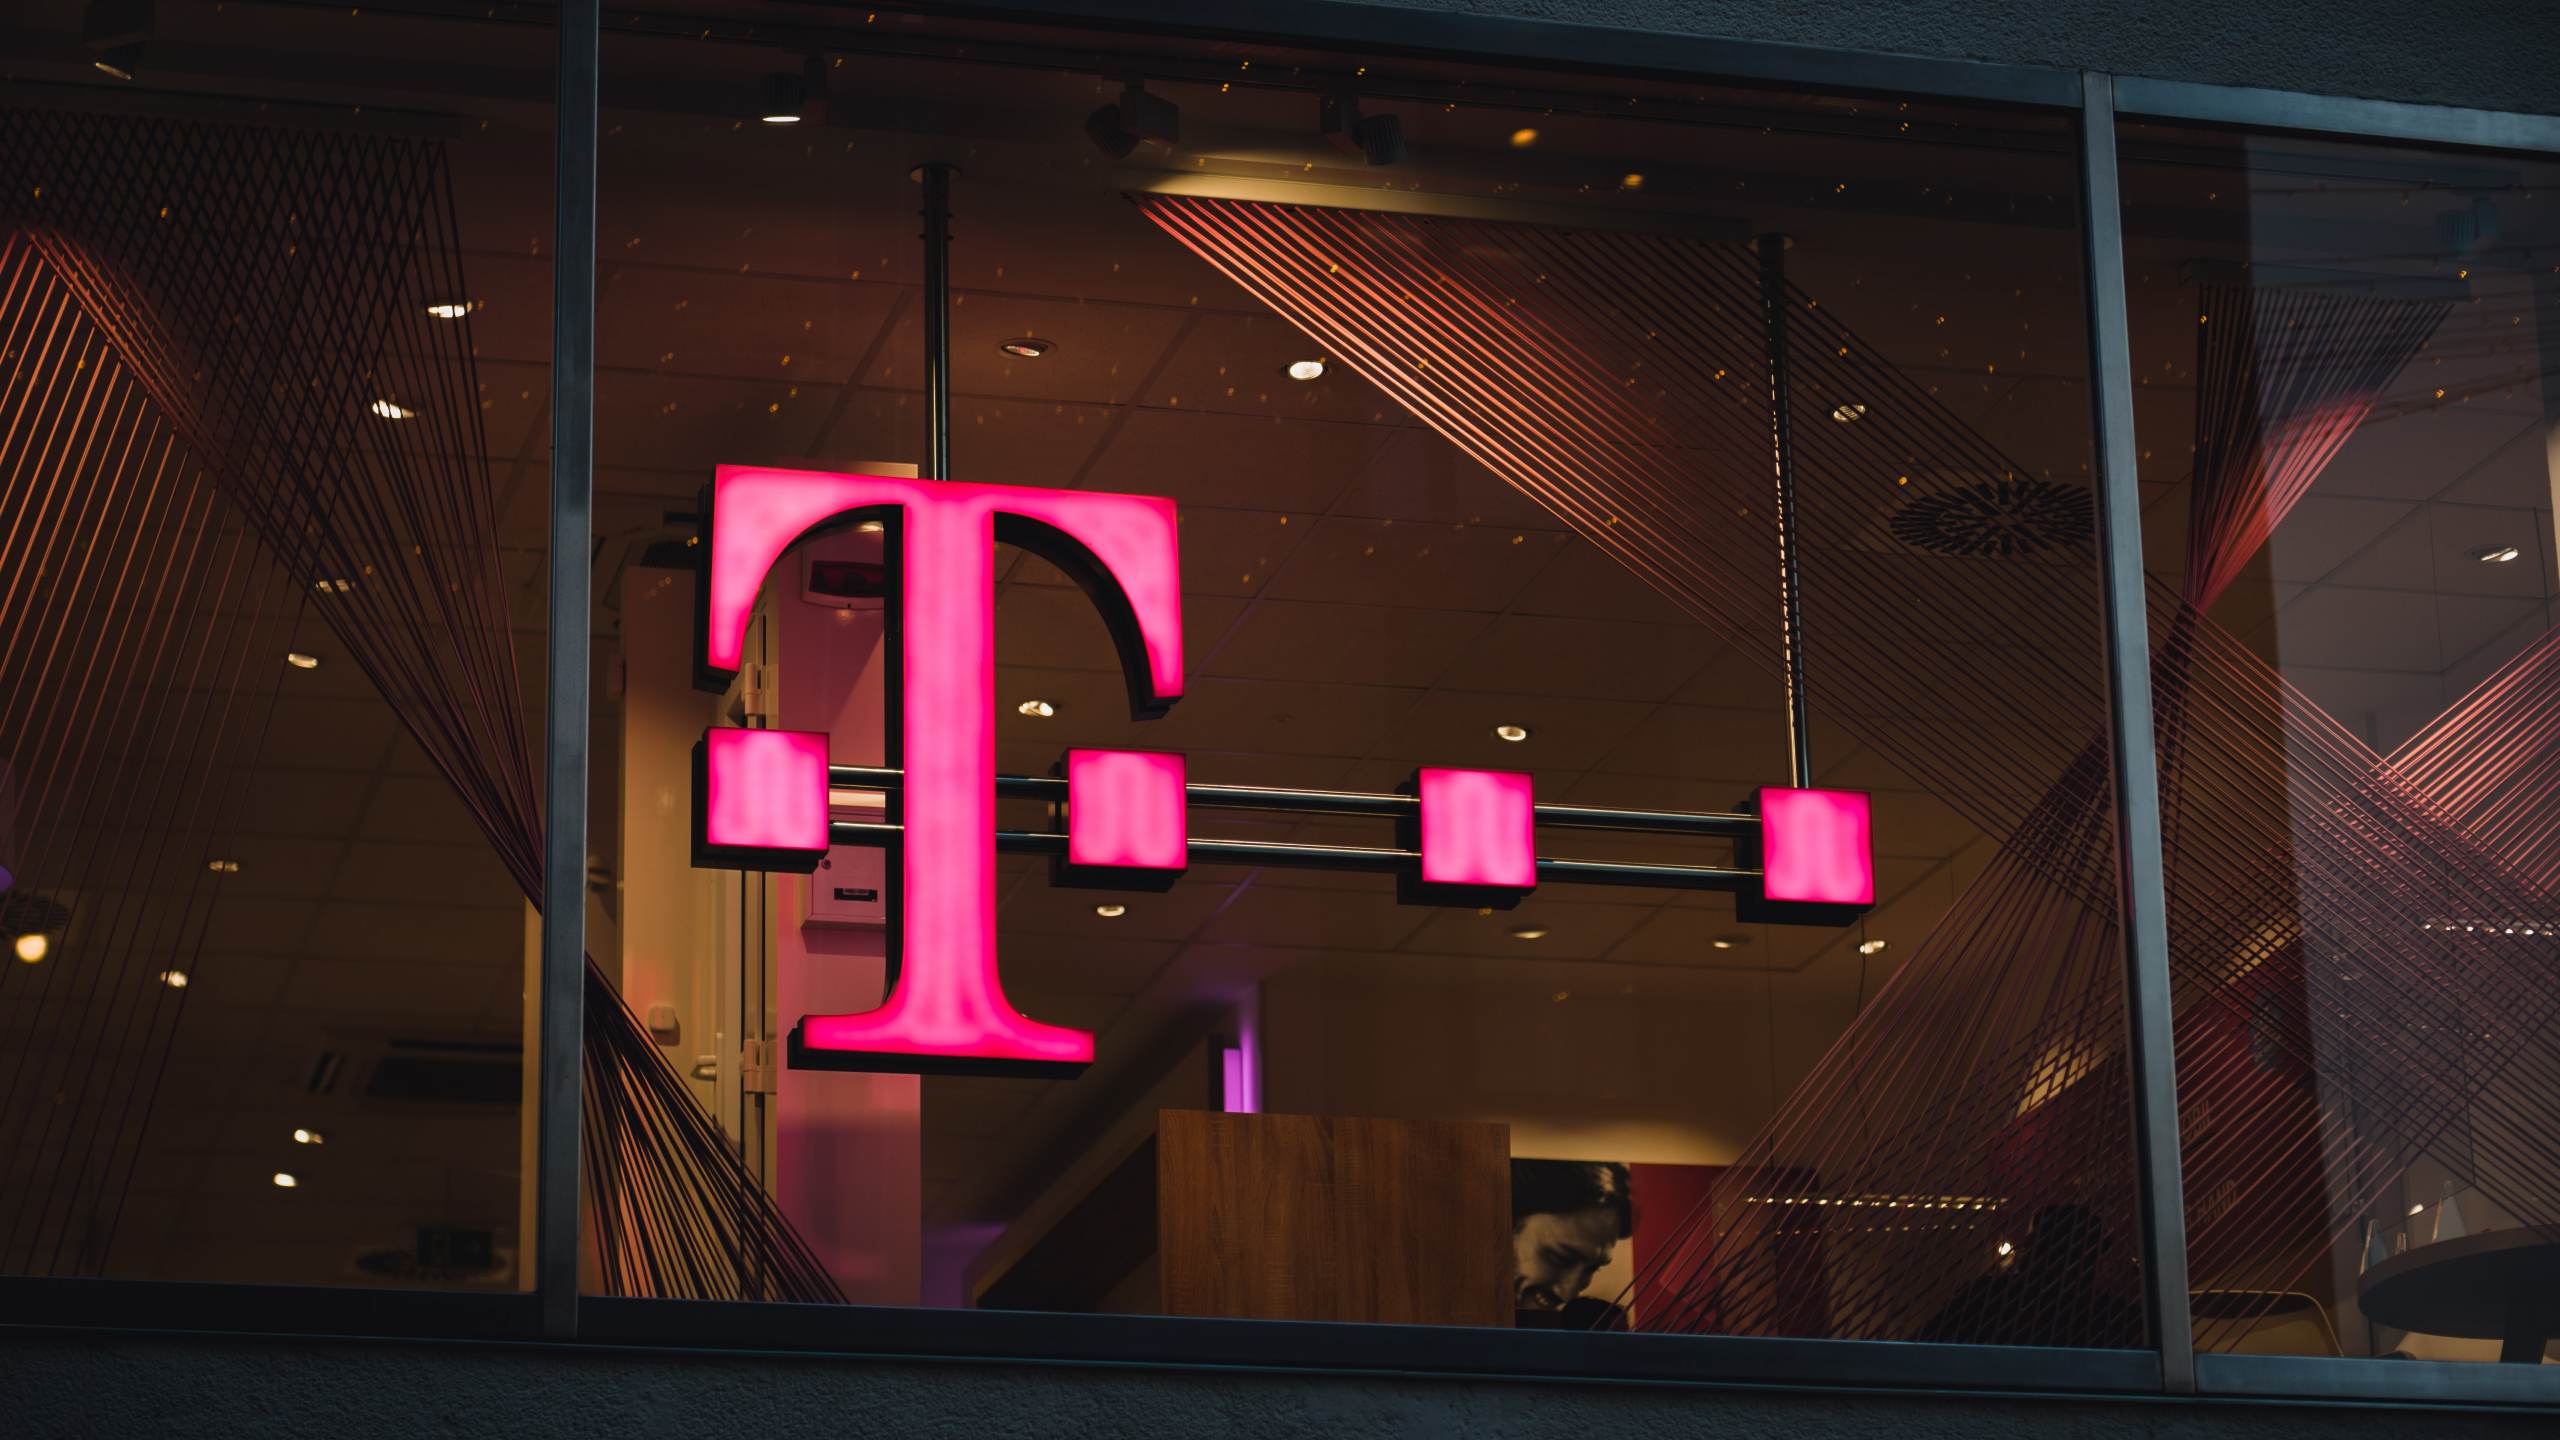  EXCLUSIVE: T-Mobile Disregards Supreme Court Ruling on Vaccine Mandate – Will Terminate Unvaccinated Employees